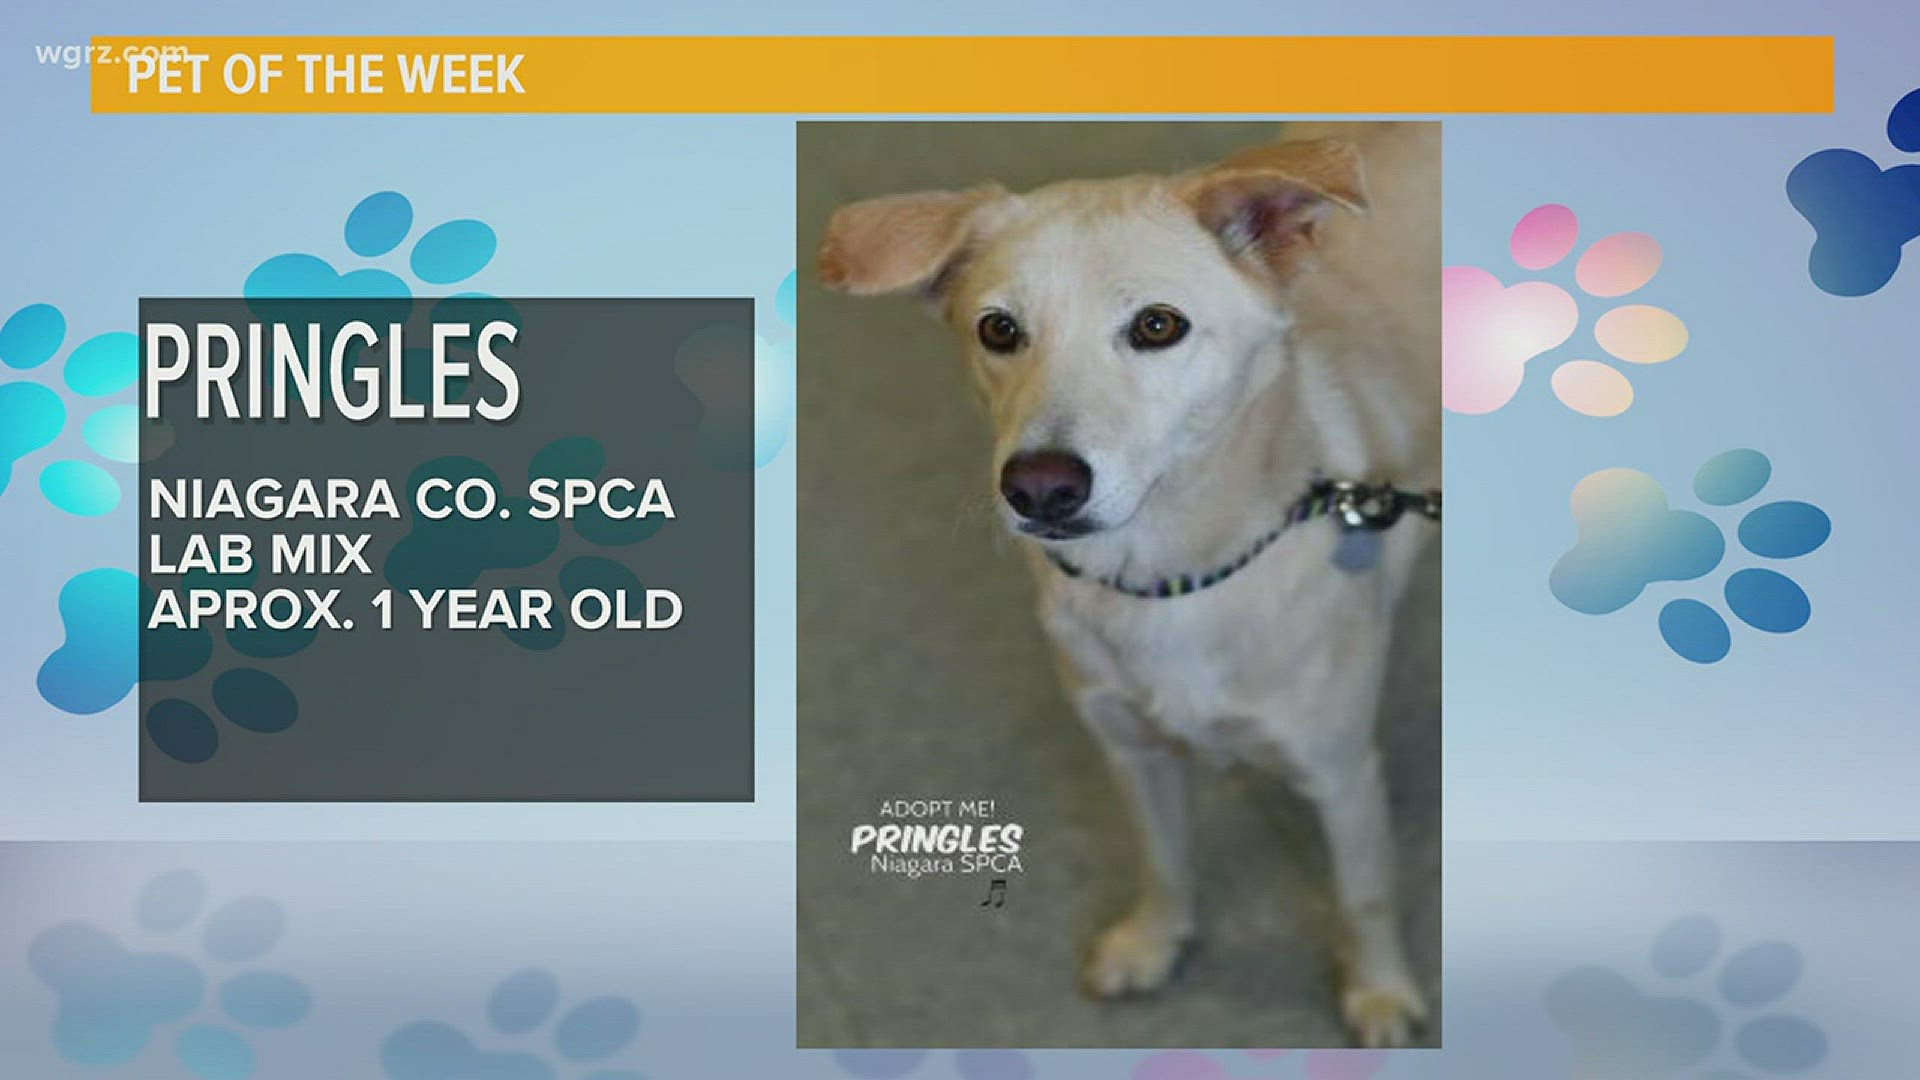 Pringles is a young lady all the way from Belize! She's a sweet, social, pup and she's looking for a furrever home.